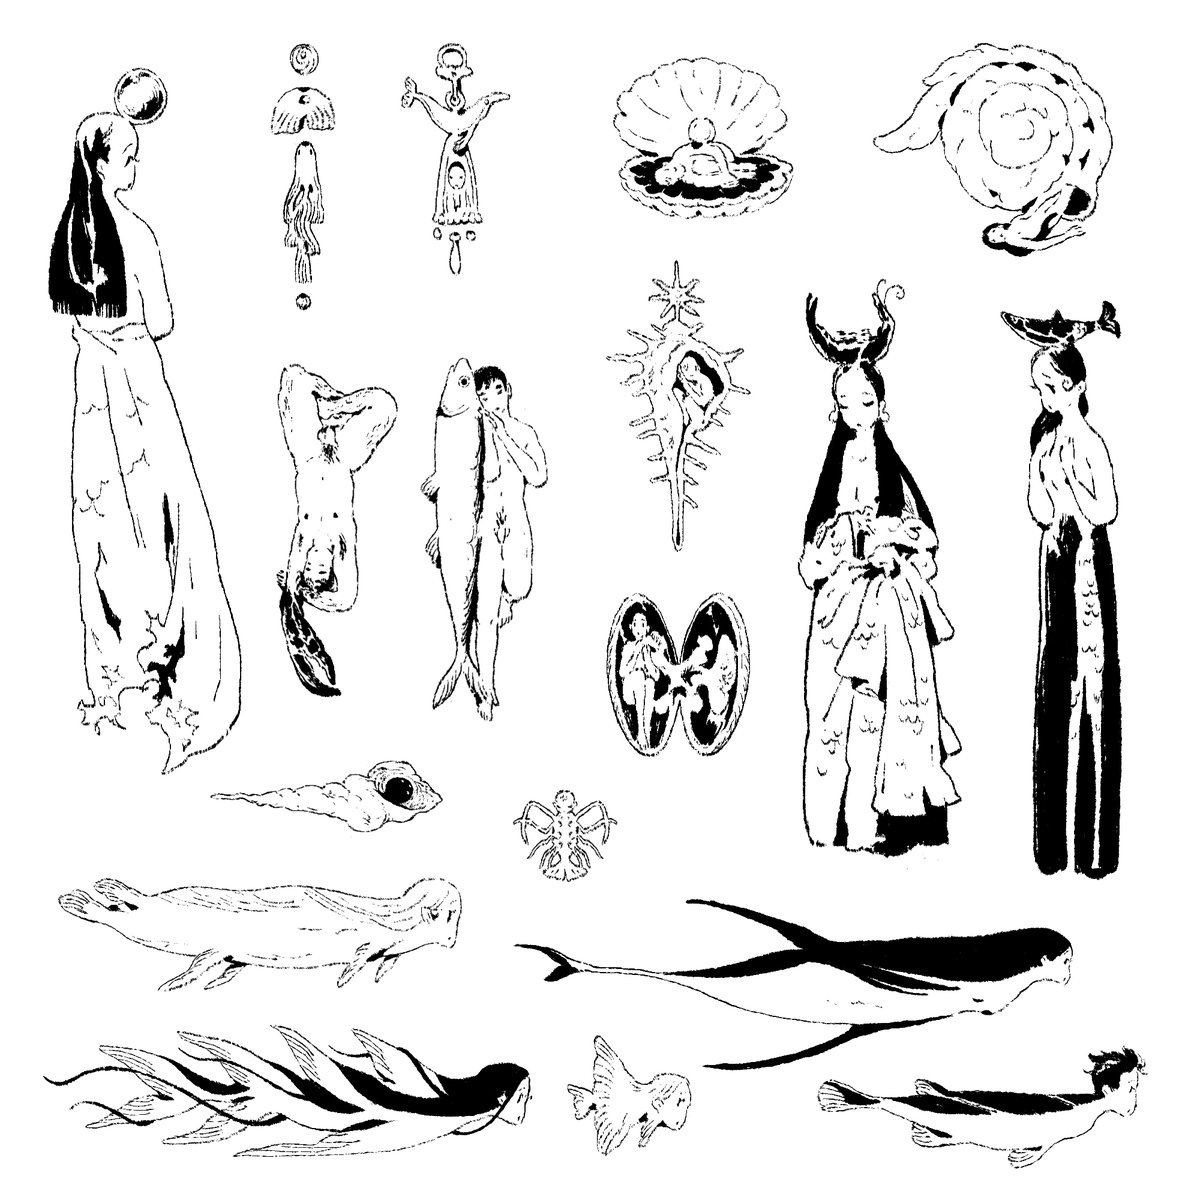 Tattoo Flash Sheet II: Oceanic is now available on my shop 🐟💤

https://t.co/DApXtutrOg 